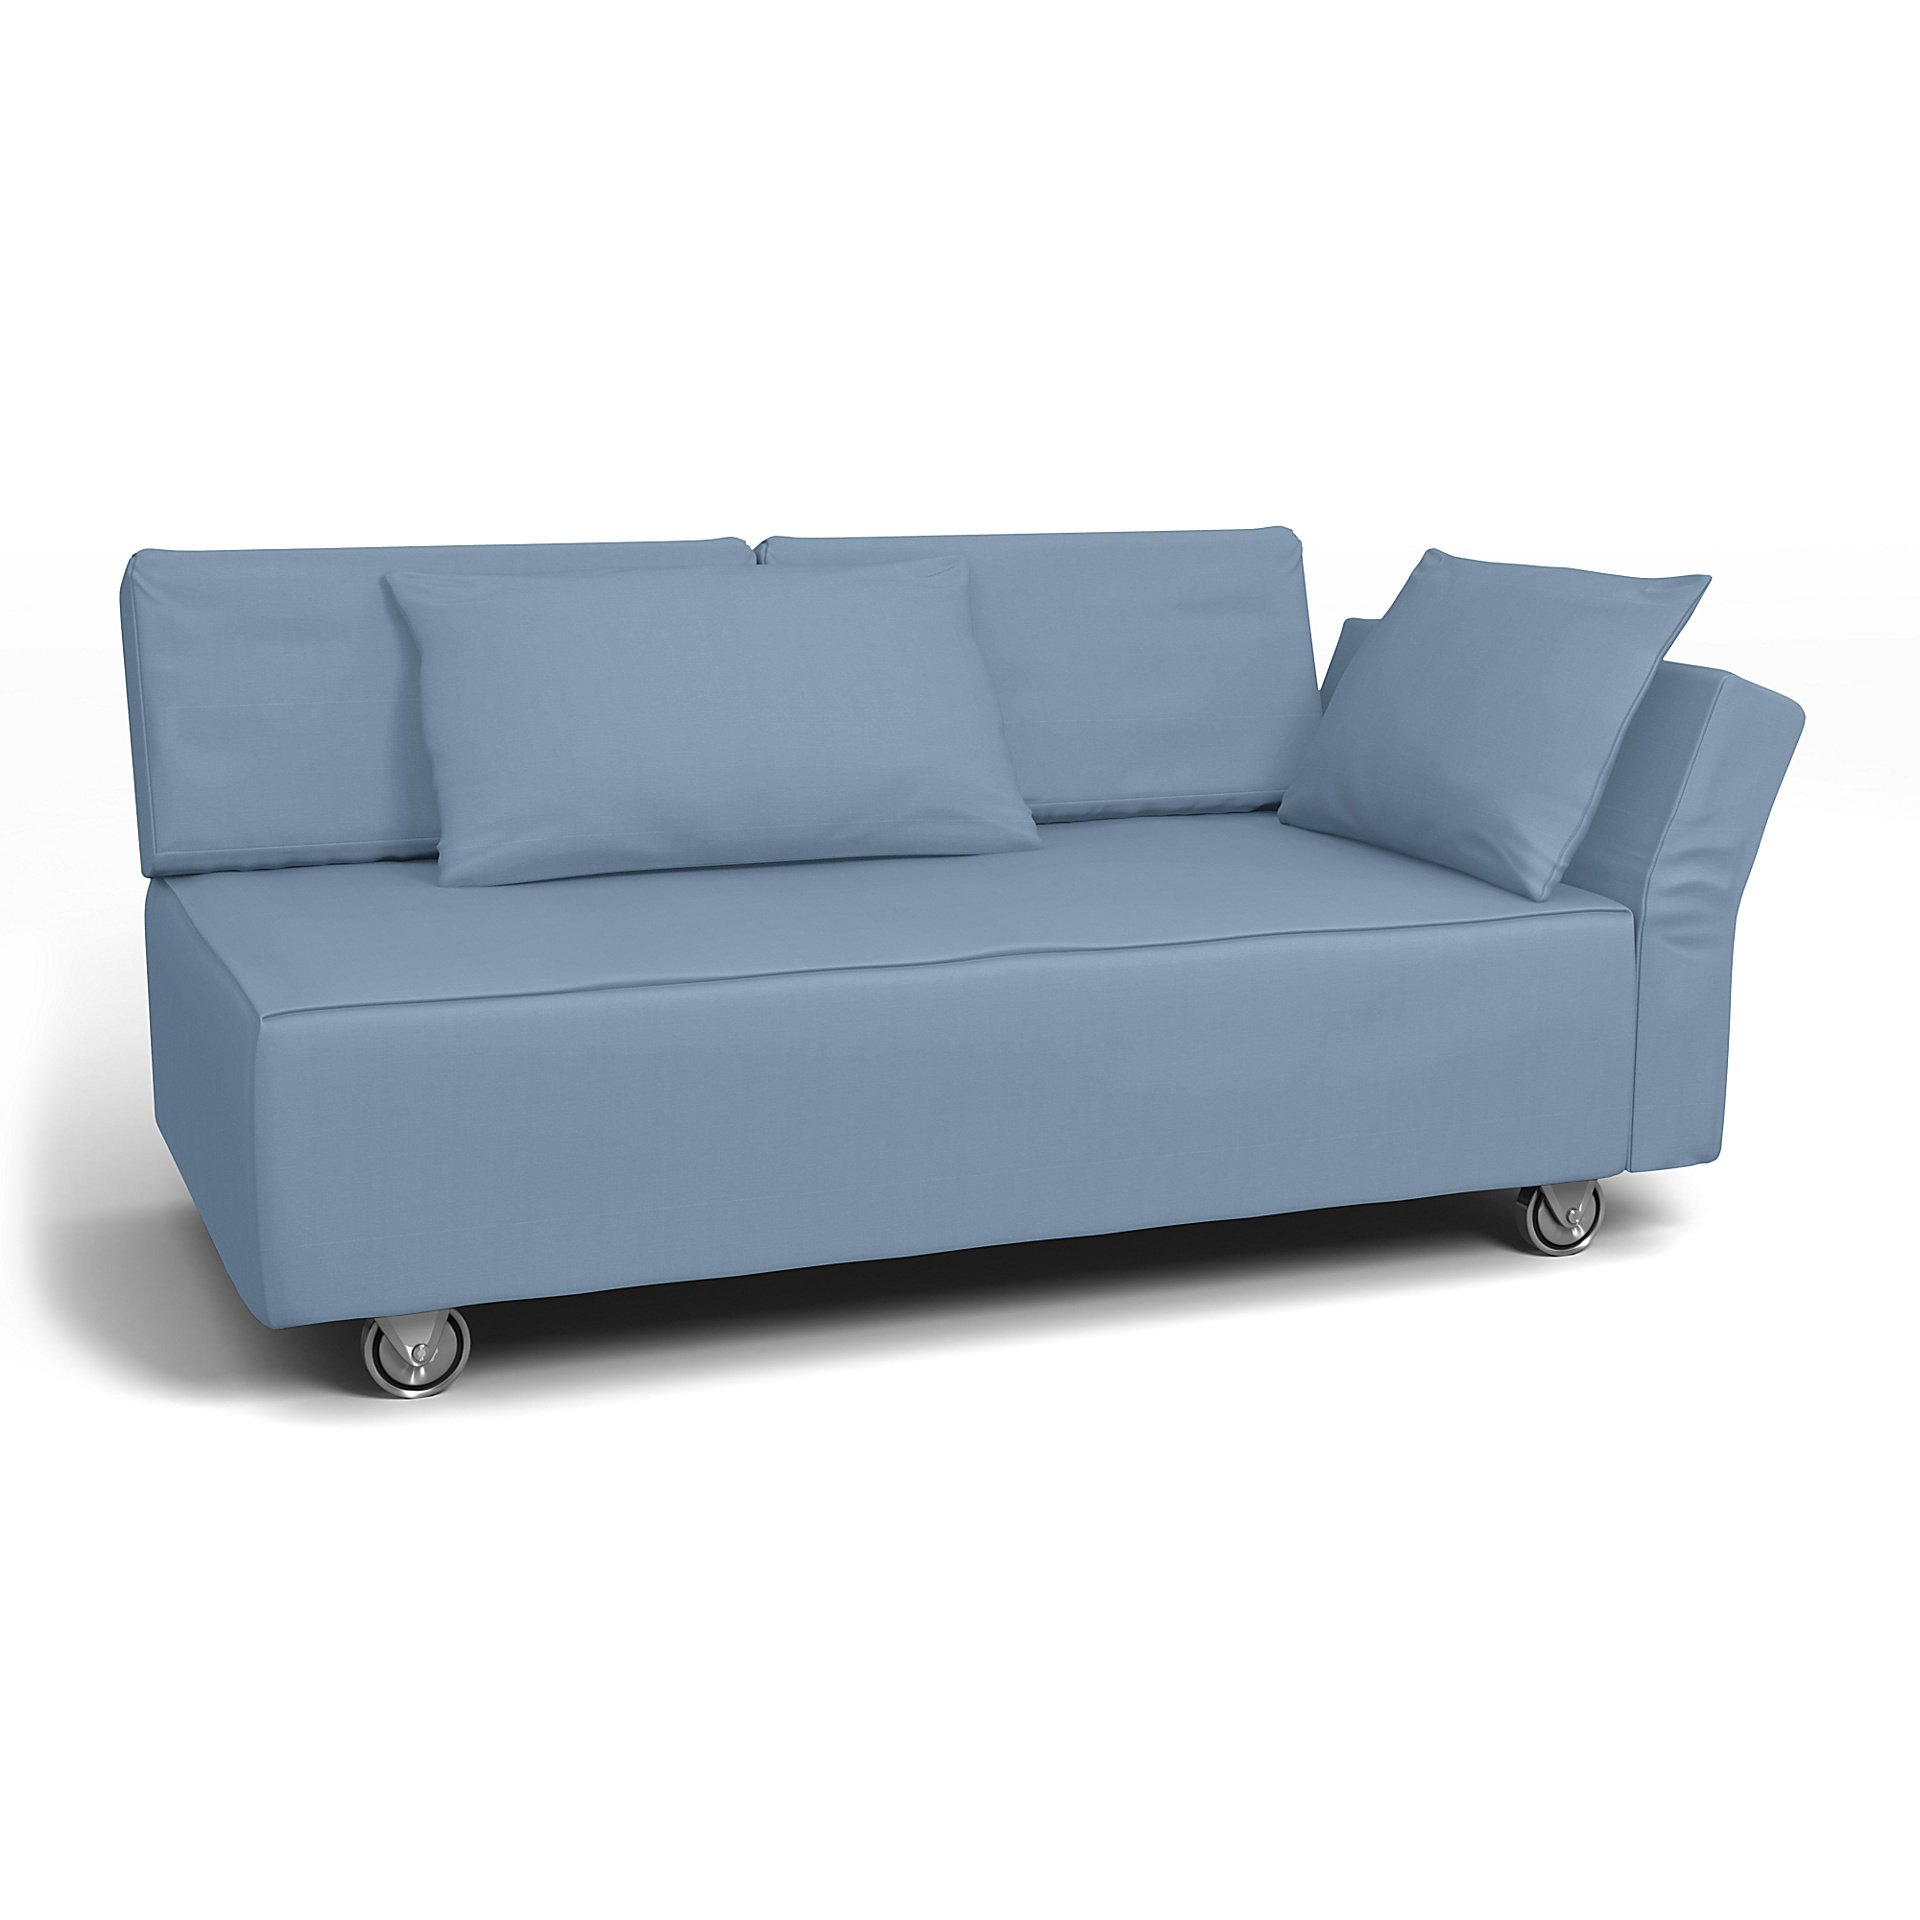 IKEA - Falsterbo 2 Seat Sofa with Right Arm Cover, Dusty Blue, Cotton - Bemz